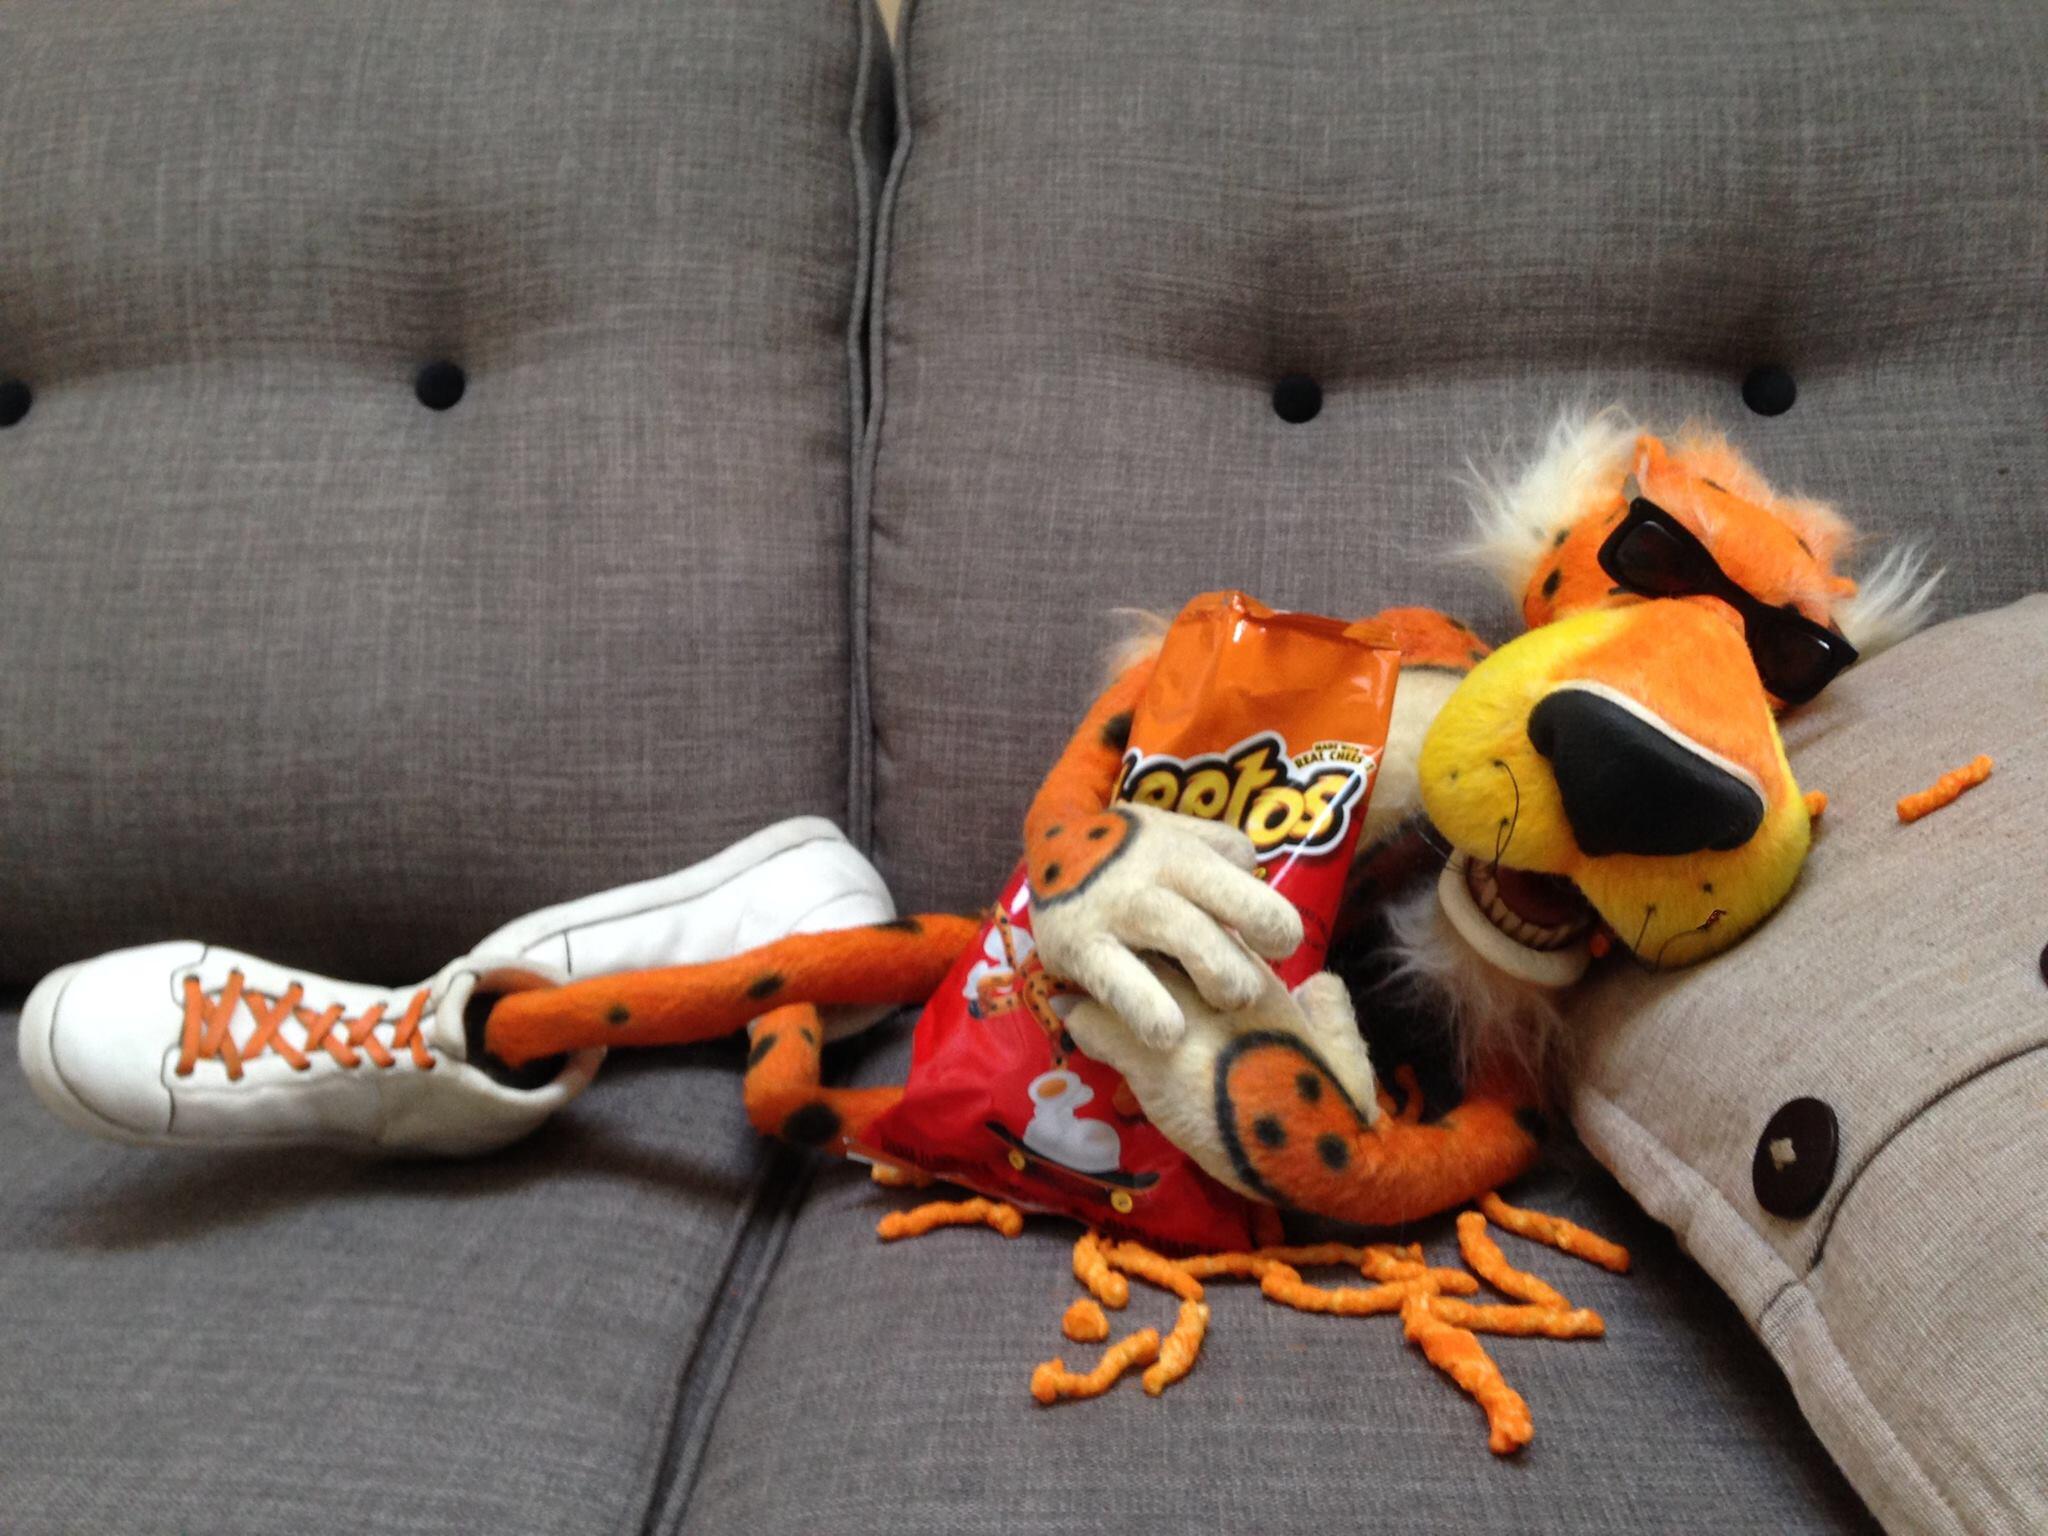 Chester Cheetah: Too Cool to Fool